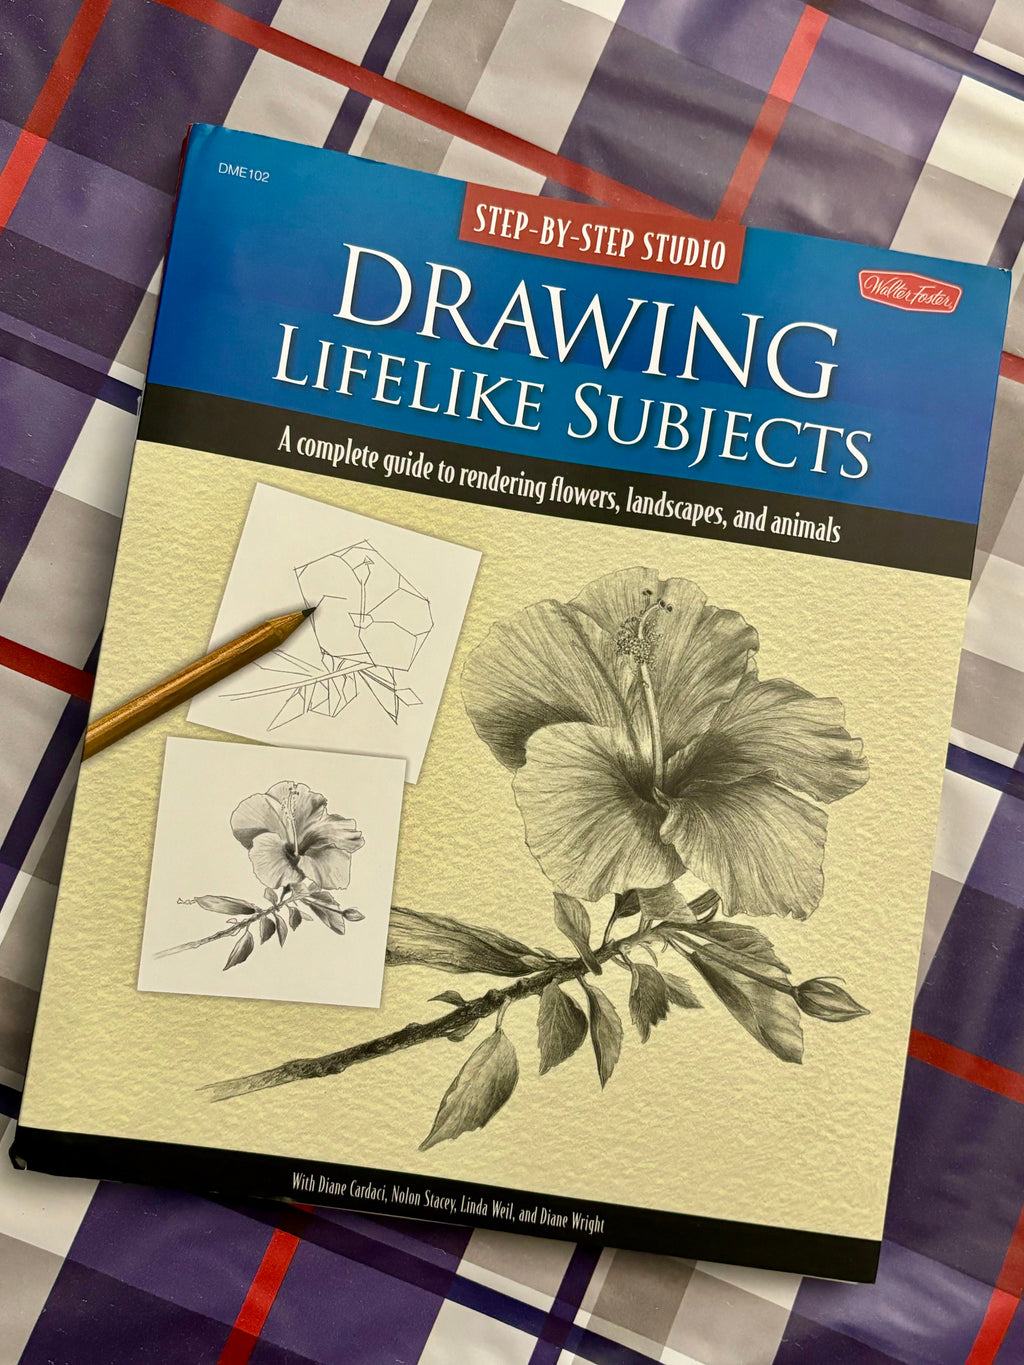 Step-By-Step Studio: Drawing Lifelike Subjects: A complete guide to rendering flowers, landscapes, and animals